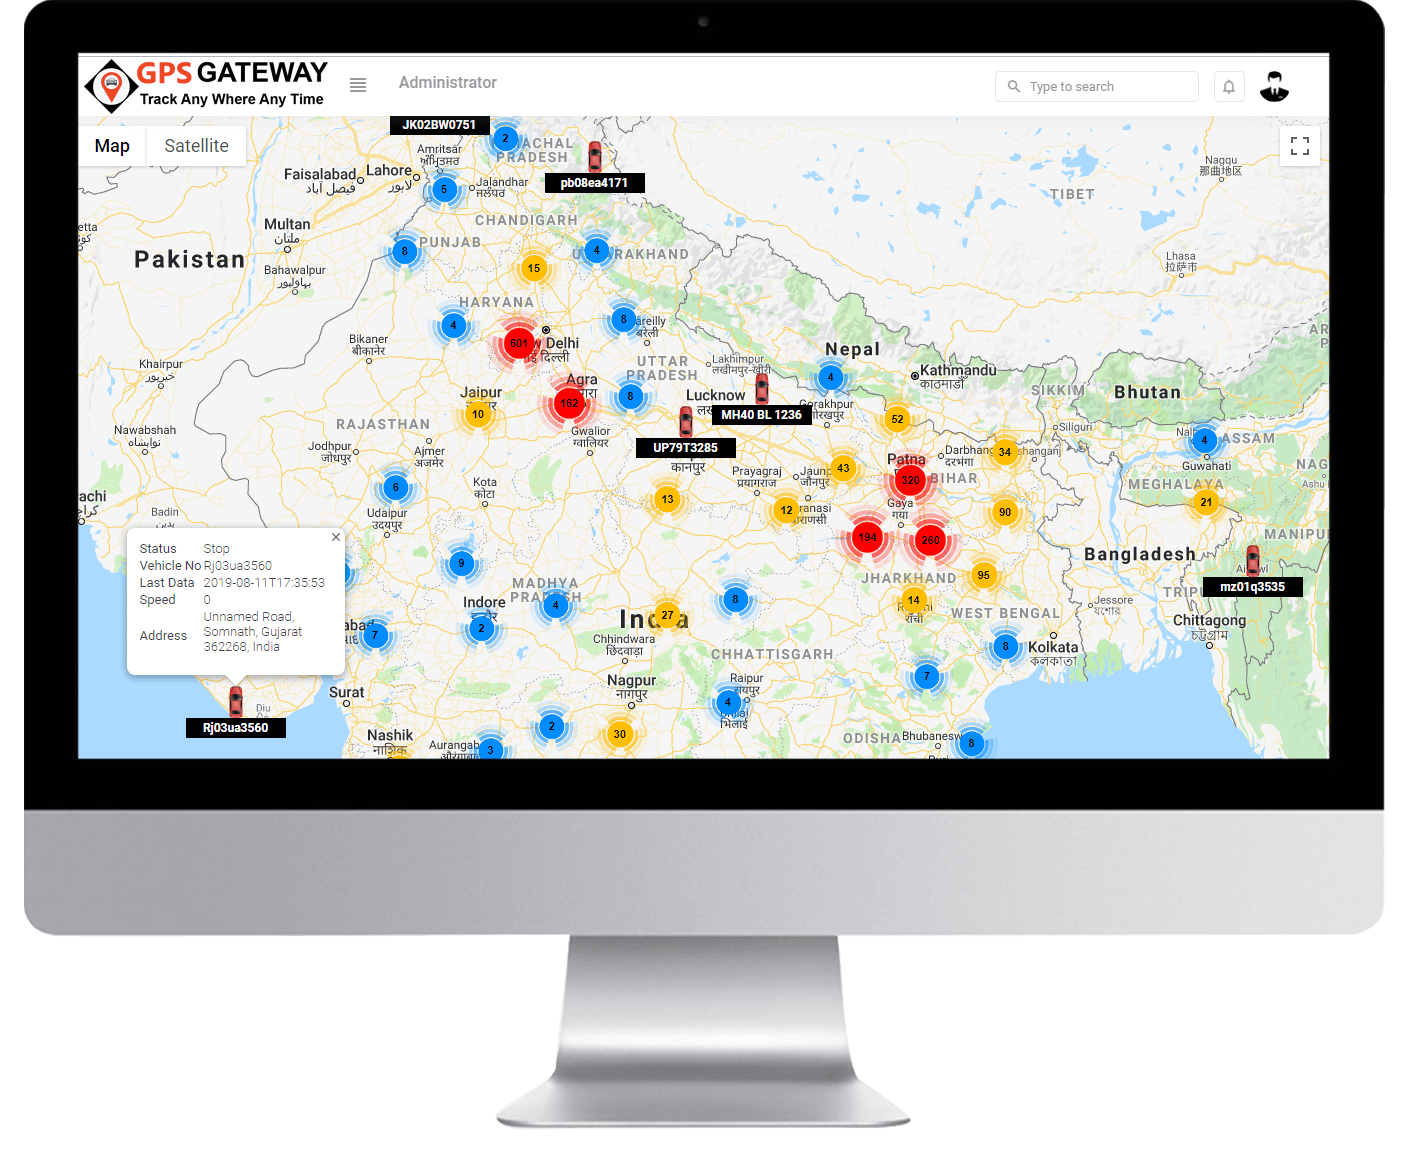 sales empoyee tracking software, Fleet gps tracking app, Fleet gps tracking system, Fleet gps tracking app android